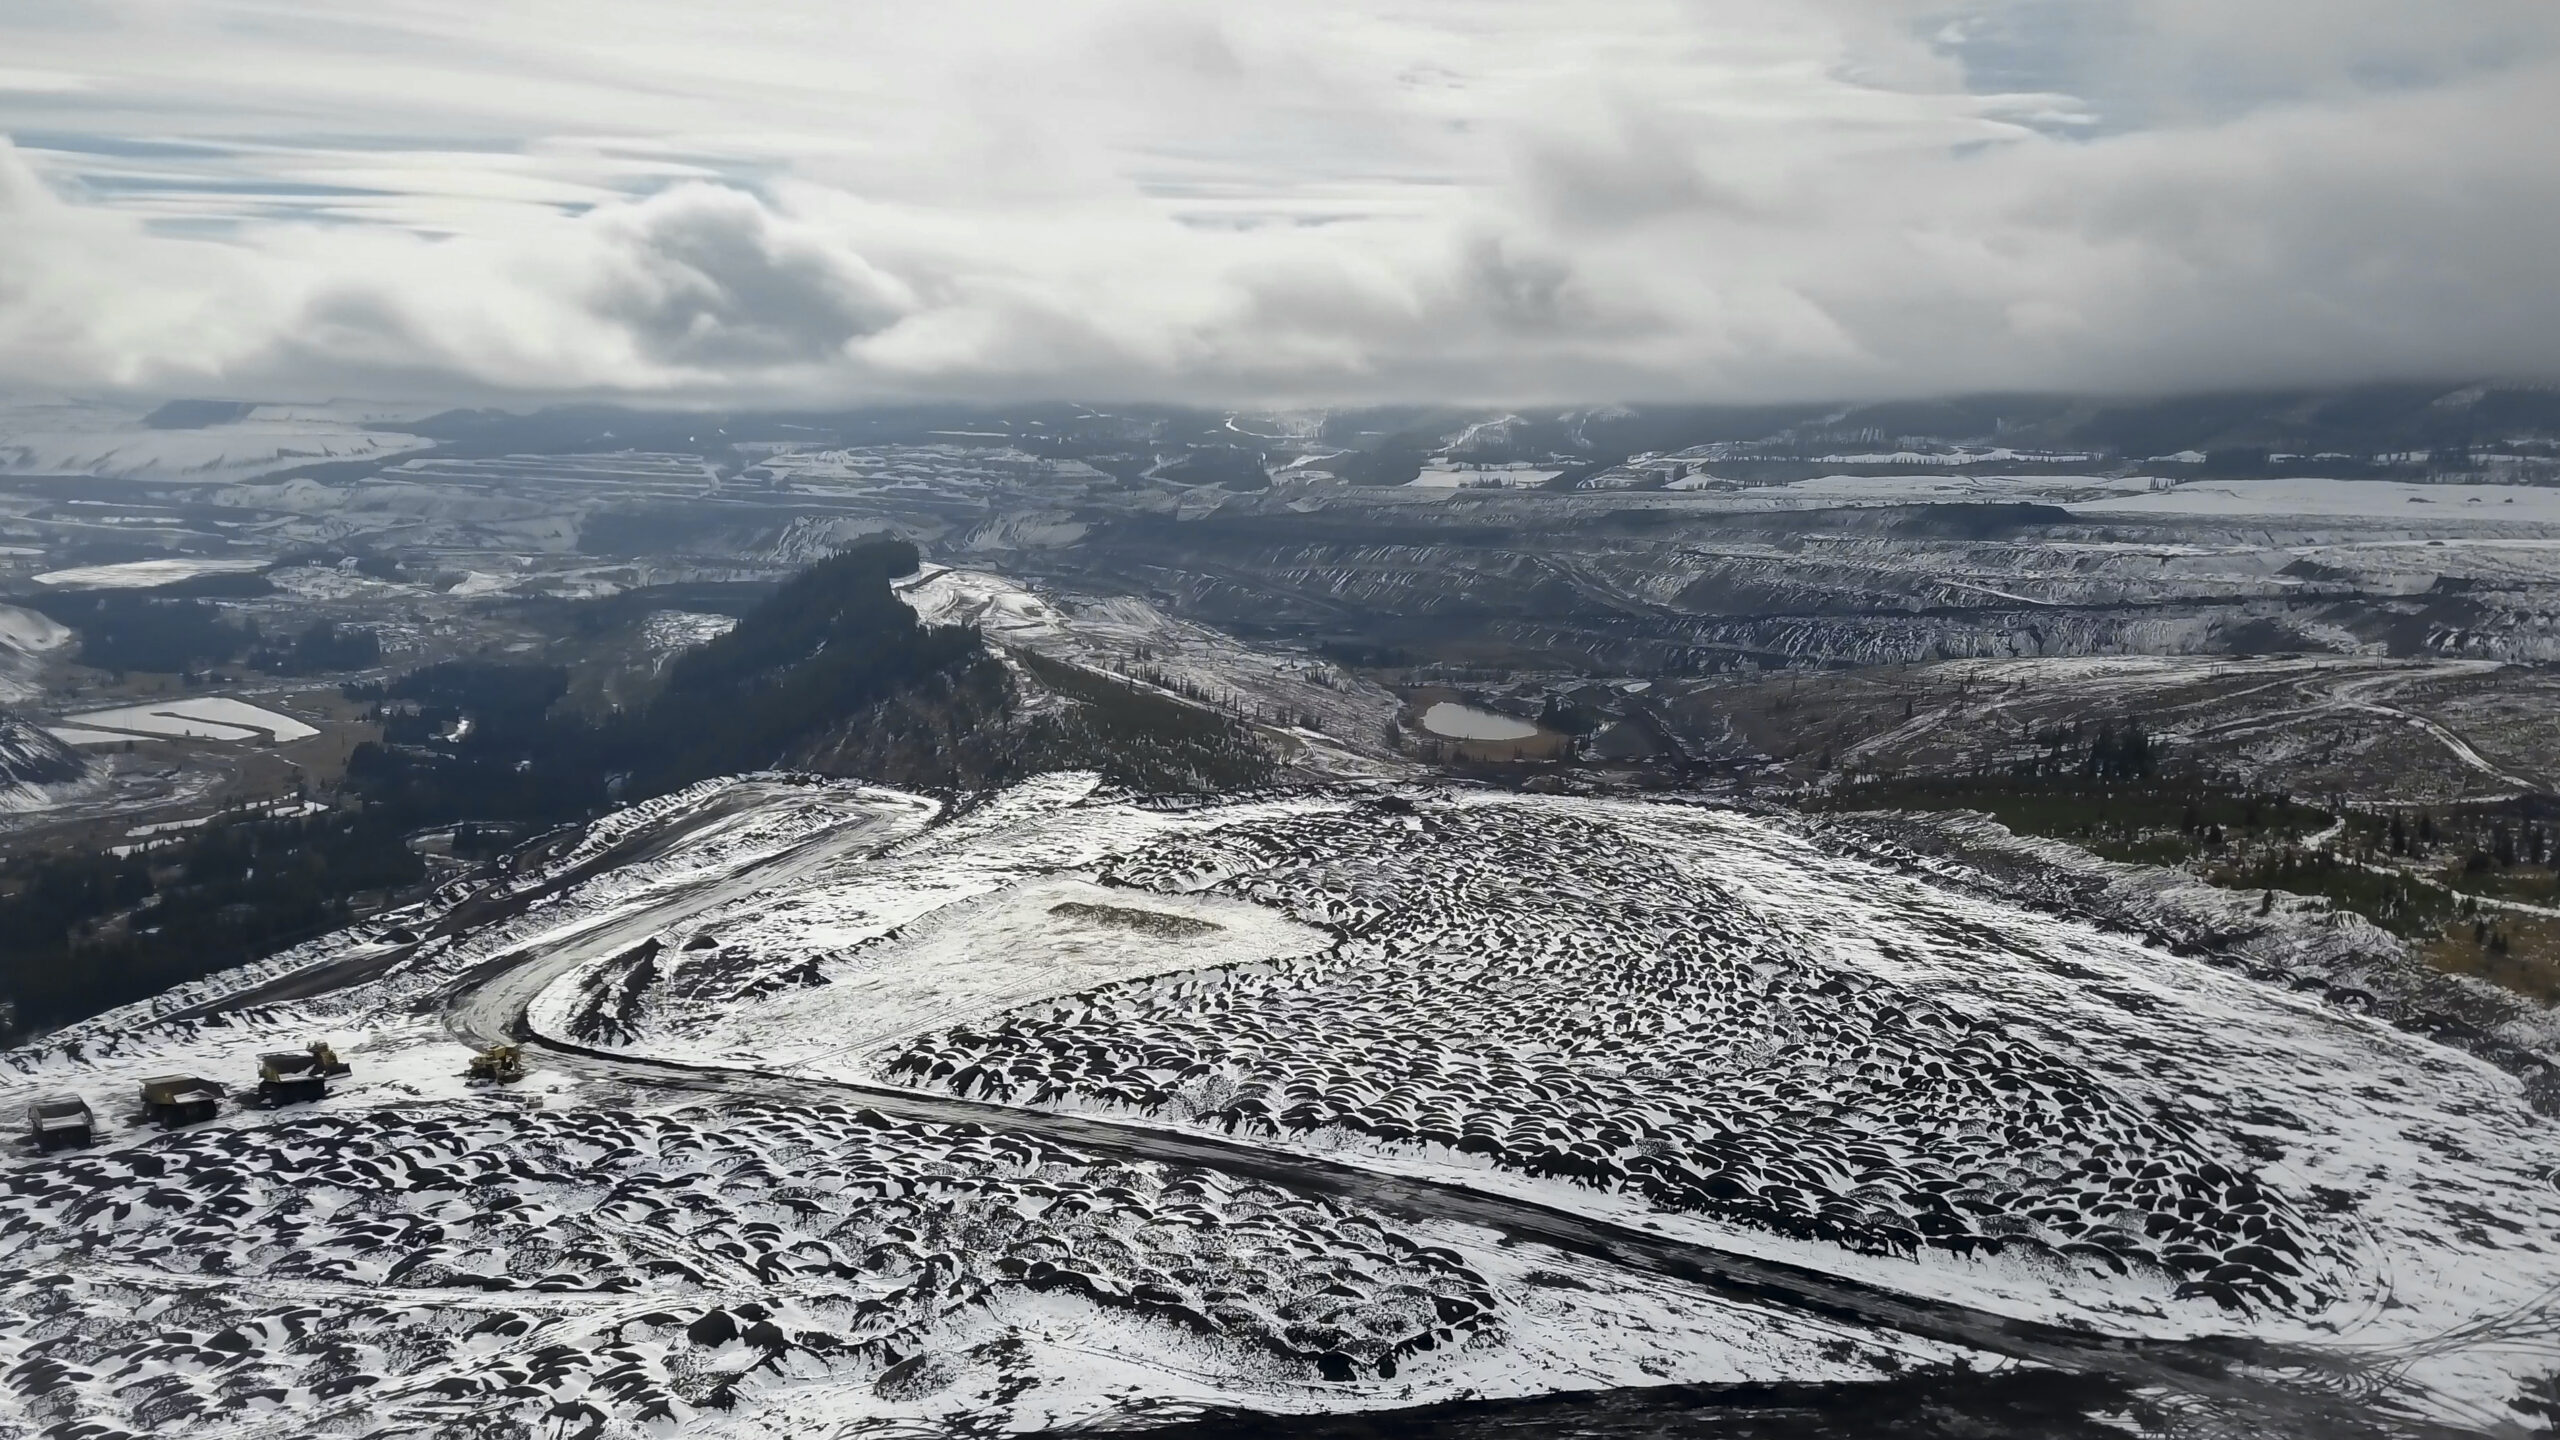 An aerial view of Teck Resources' Elk Valley coal mines in the snow